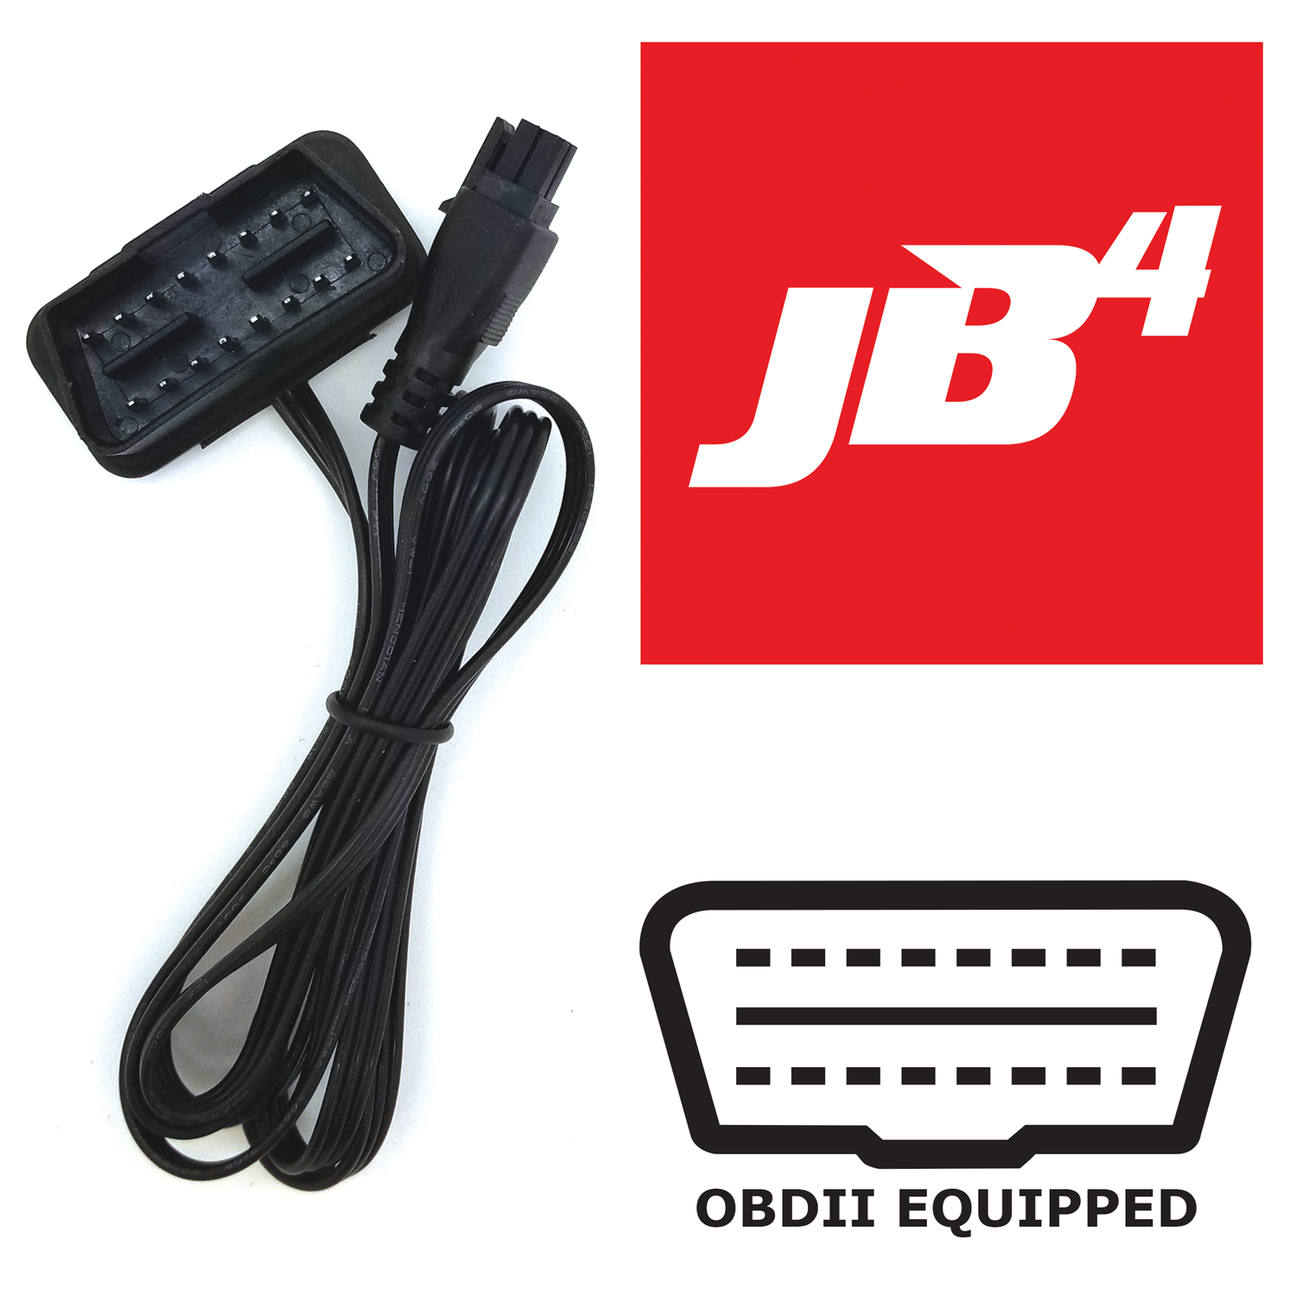 JB4 Tuner for Subaru WRX, Ascent, Legacy, & Outback